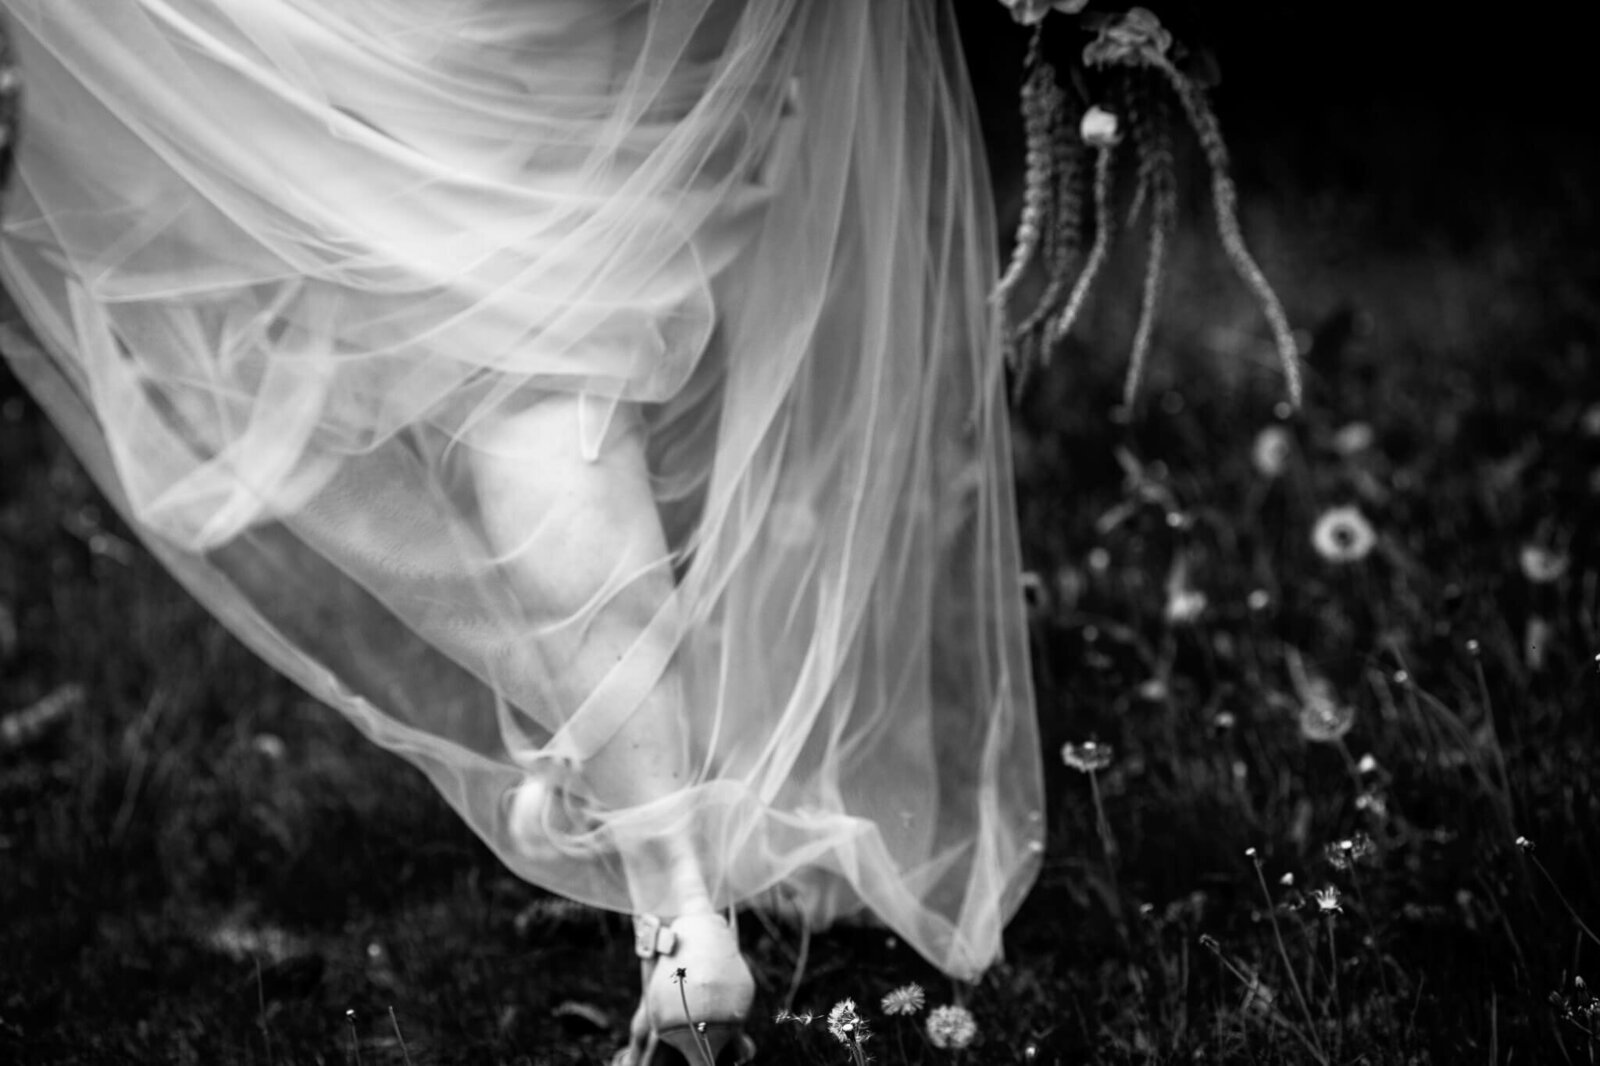 closeup of wedding dress and shoes as bride walks through a field of wildflowers.